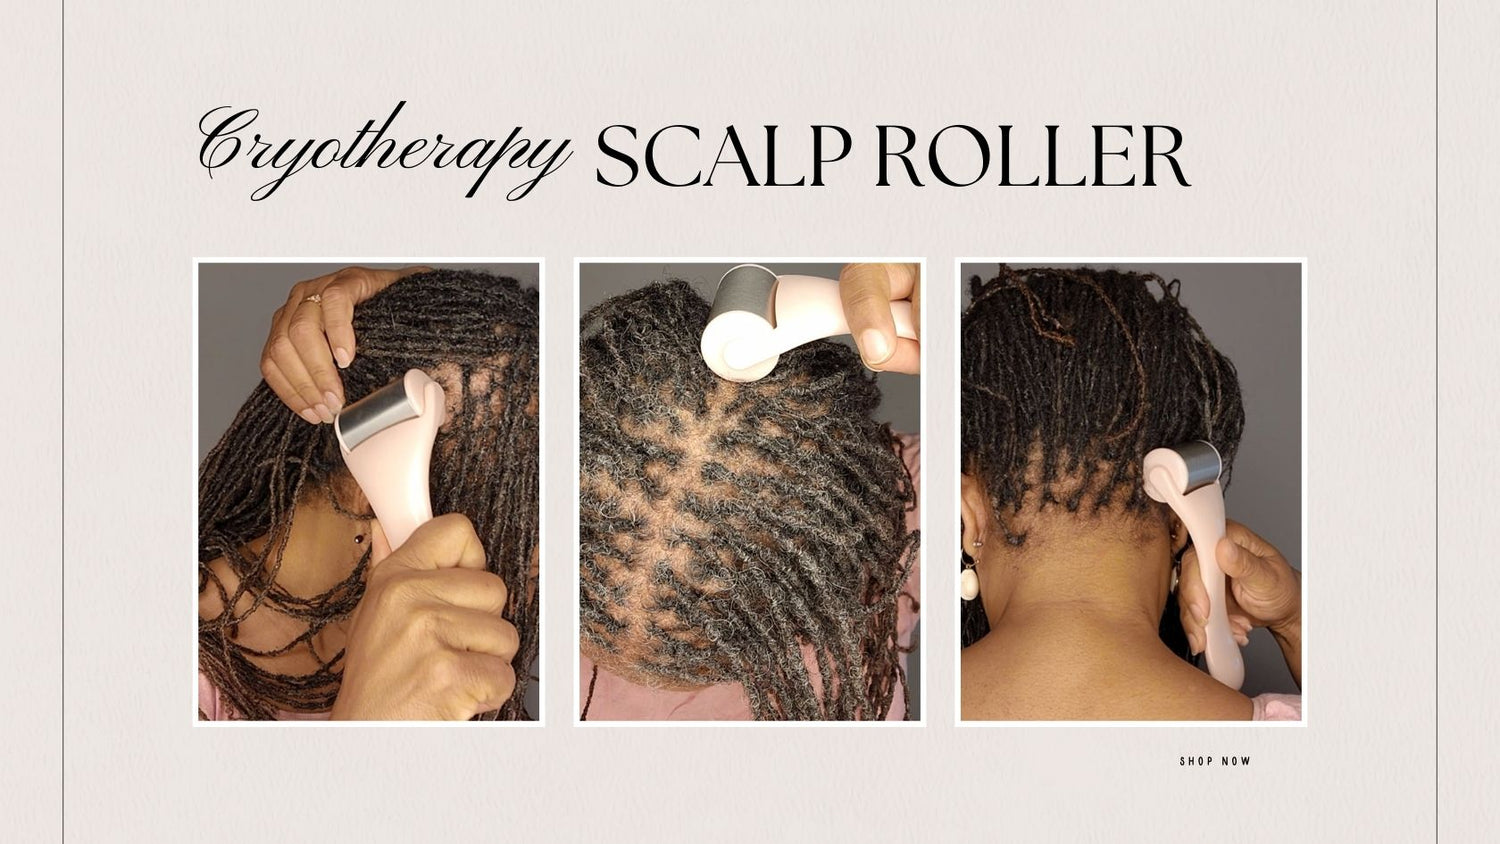 How I Solved My Scalp Issues with the Cryotherapy Scalp Roller